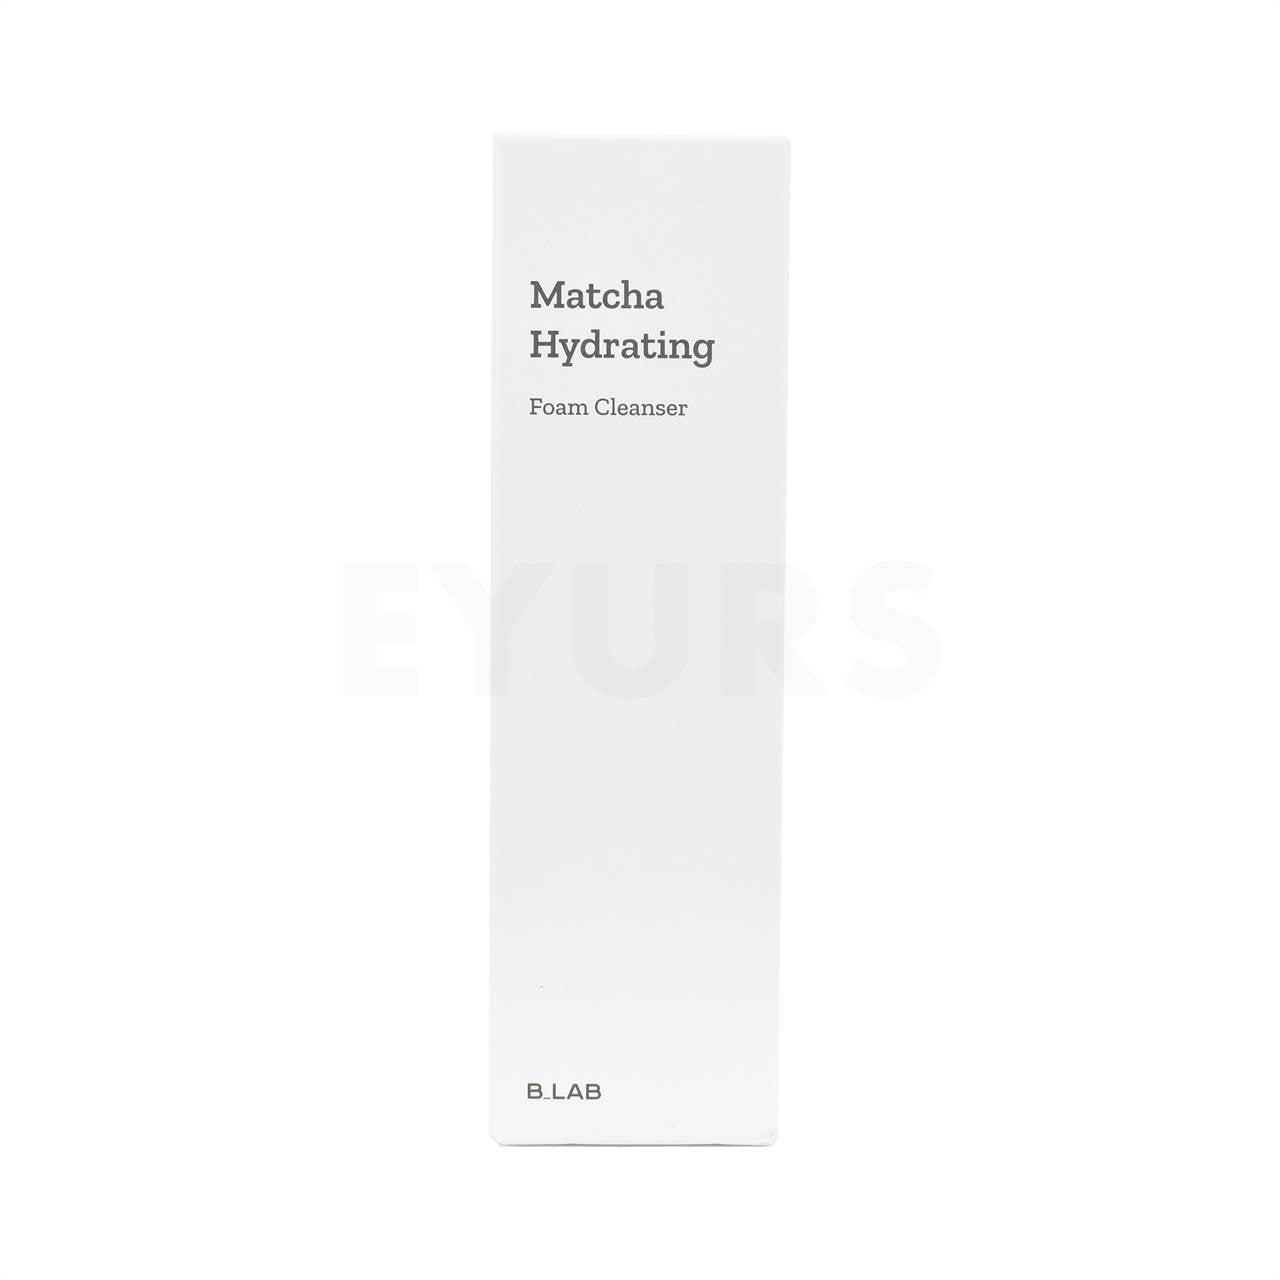 blab matcha hydrating foam cleanser front side packaging